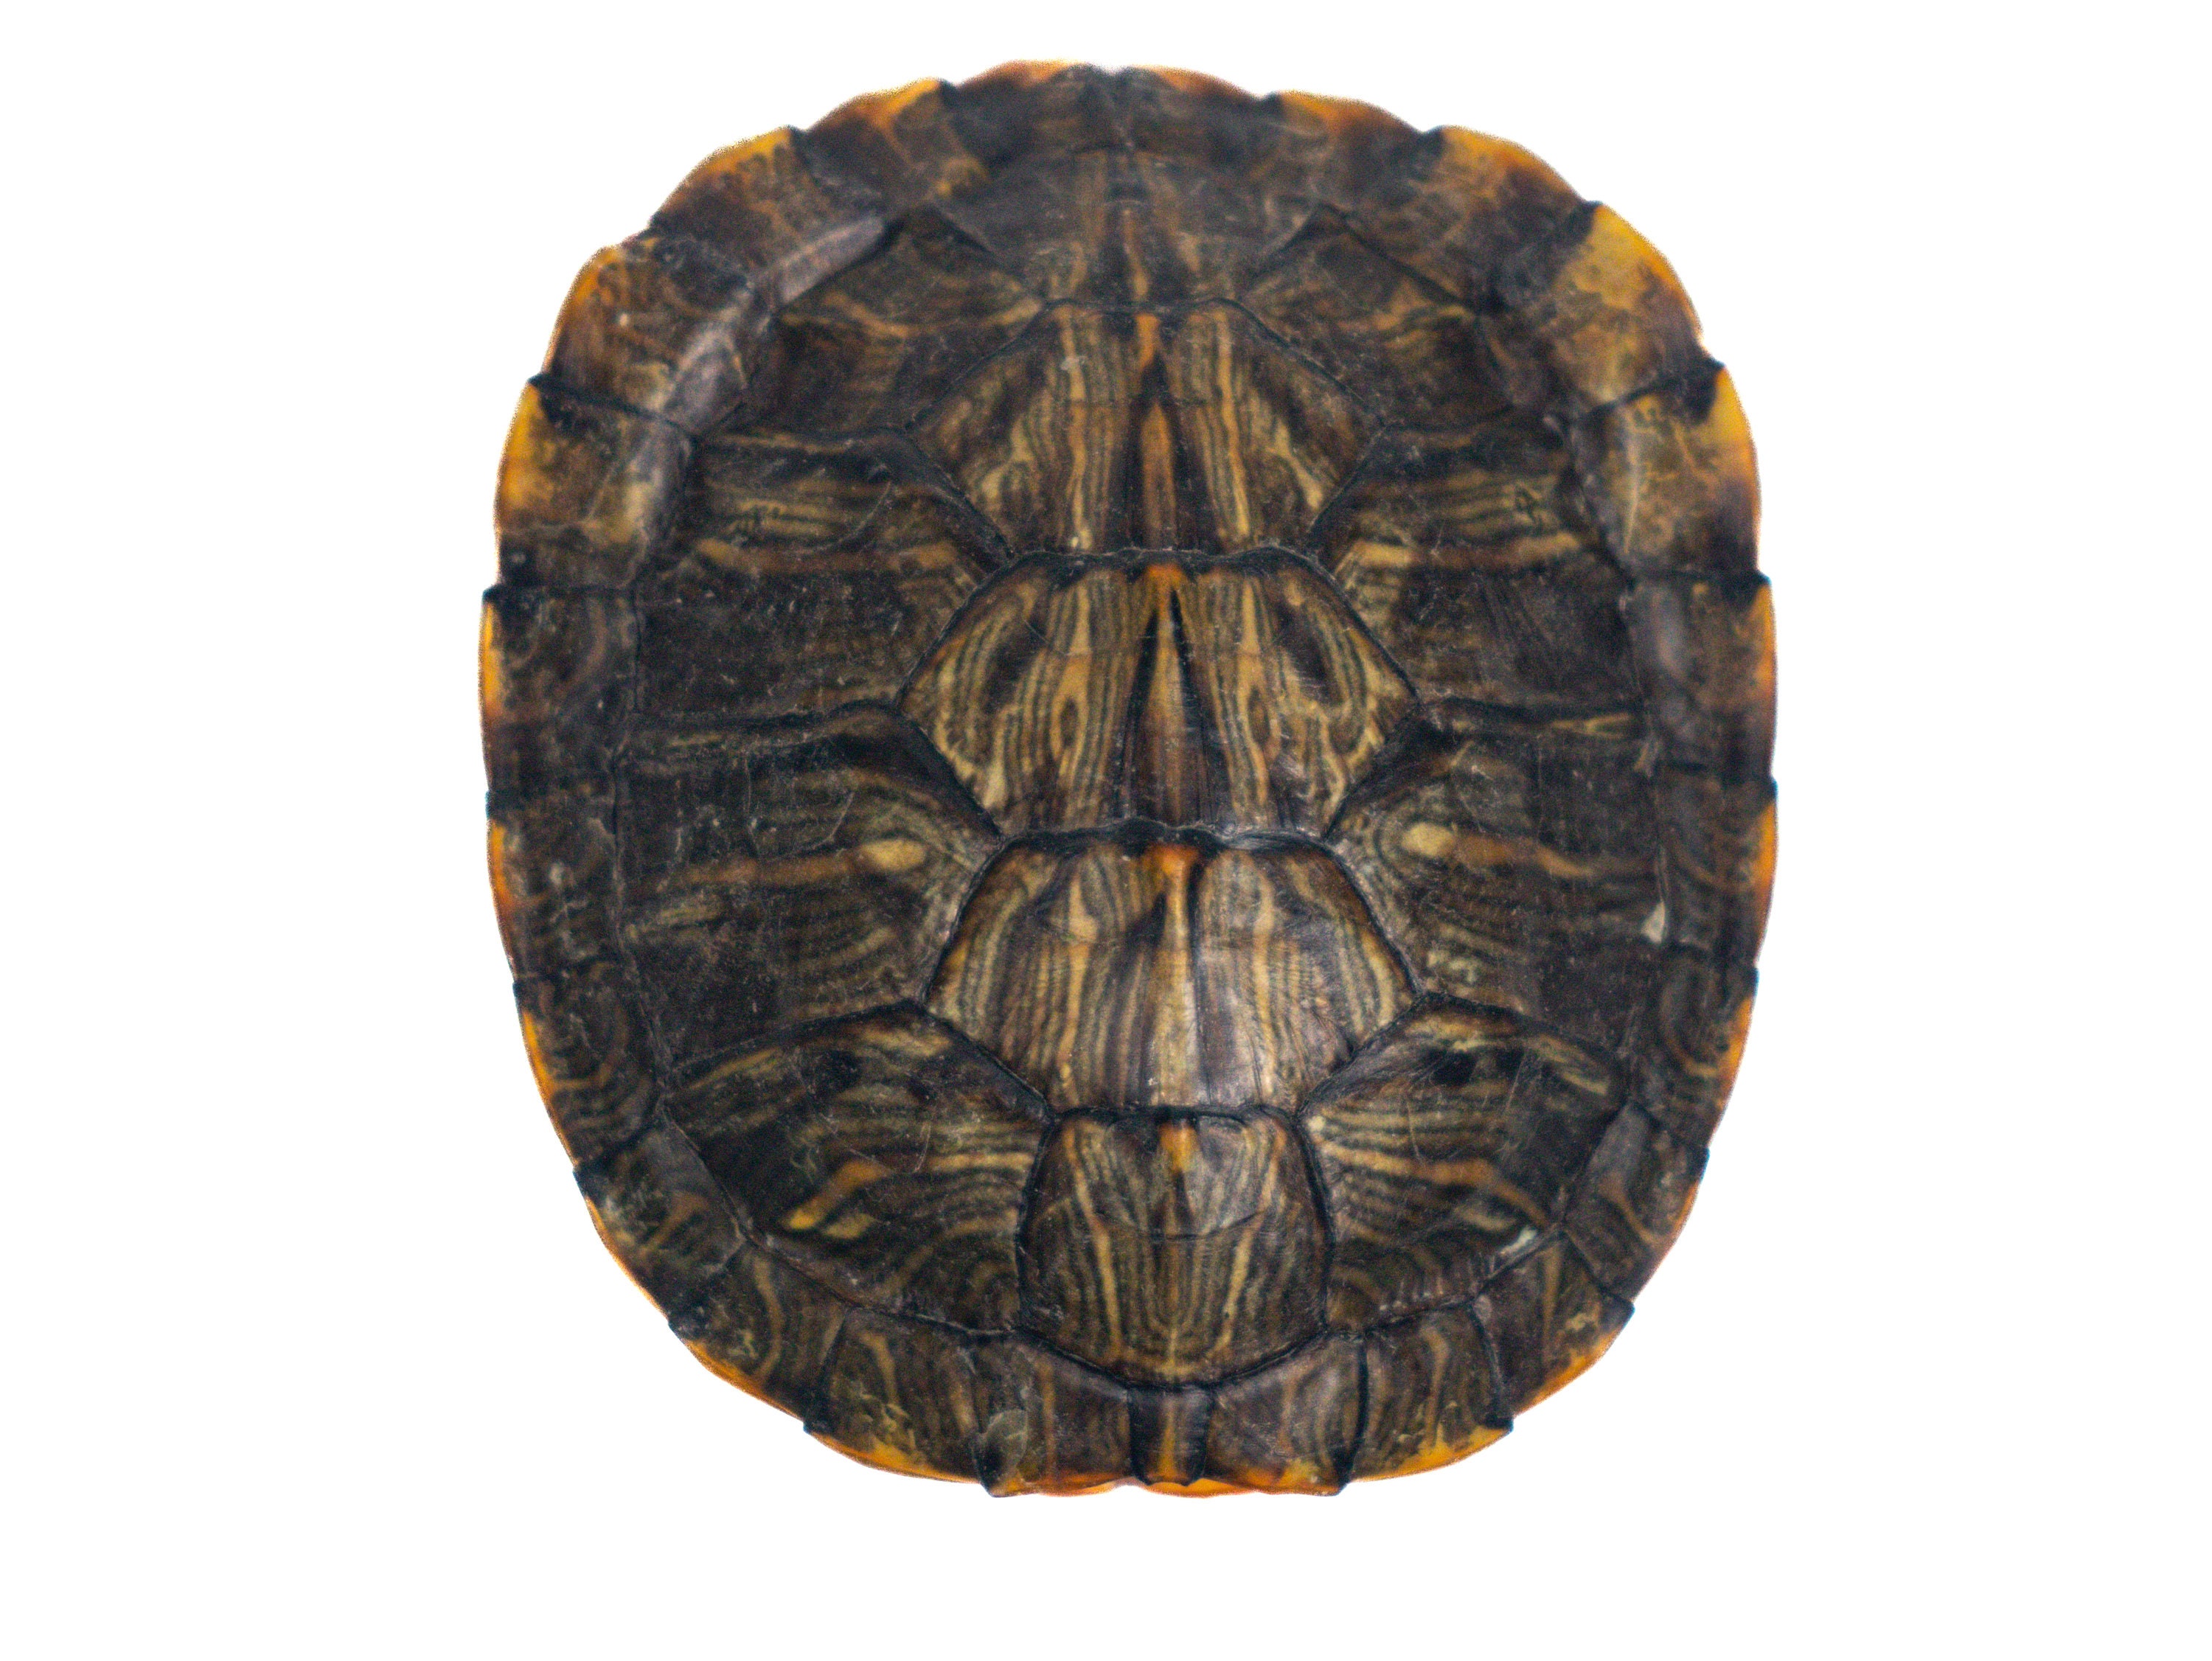 2 to 3 Red Ear Turtle Shell 227GS-0203 10UBS -  Canada